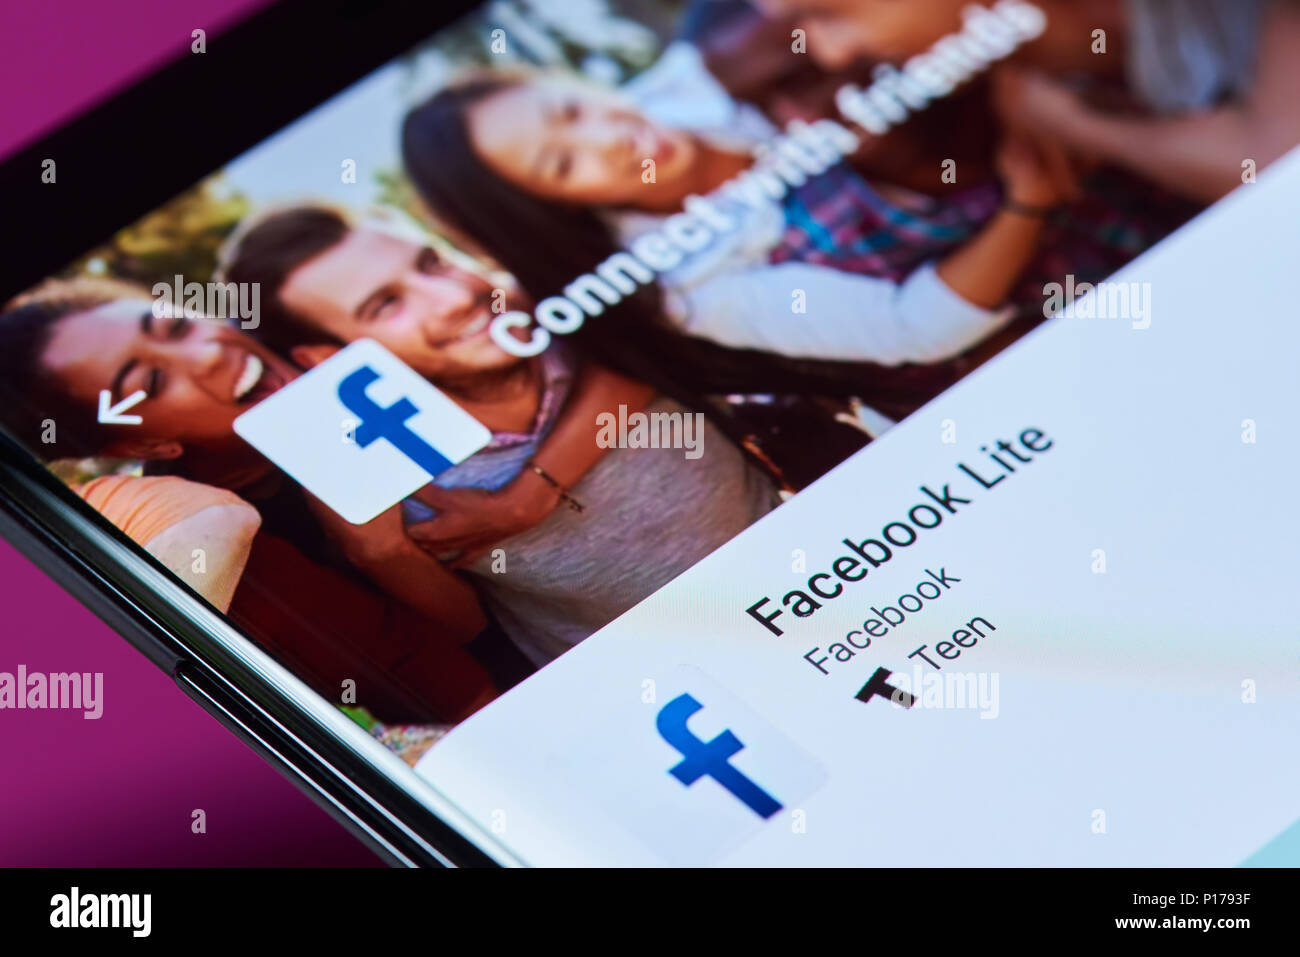 New york, USA - June 10, 2018: Facebook lite application on android smartphone screen close up view Stock Photo